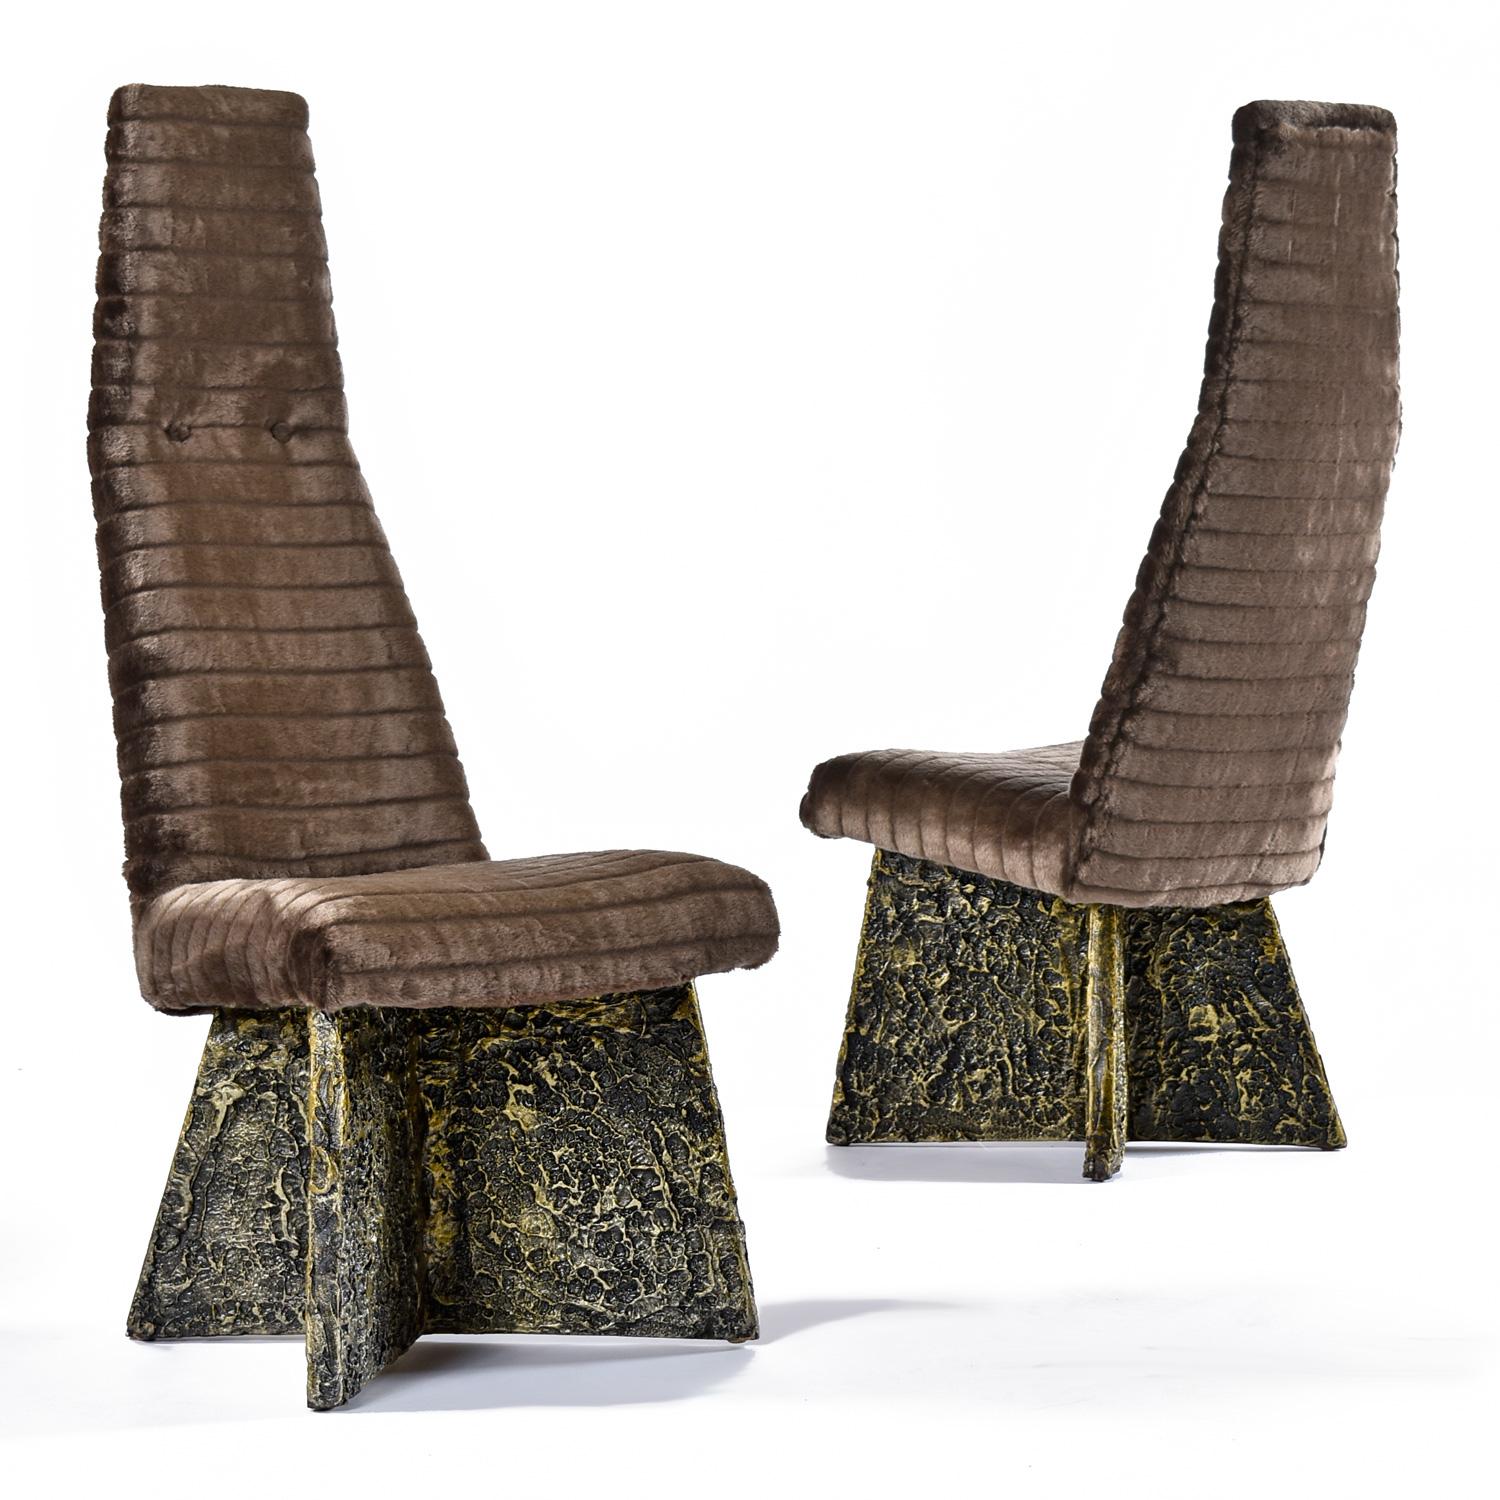 (8) Adrian Pearsall Kodiak Faux Fur Brutalist Style Dining Room Chairs For Sale 4